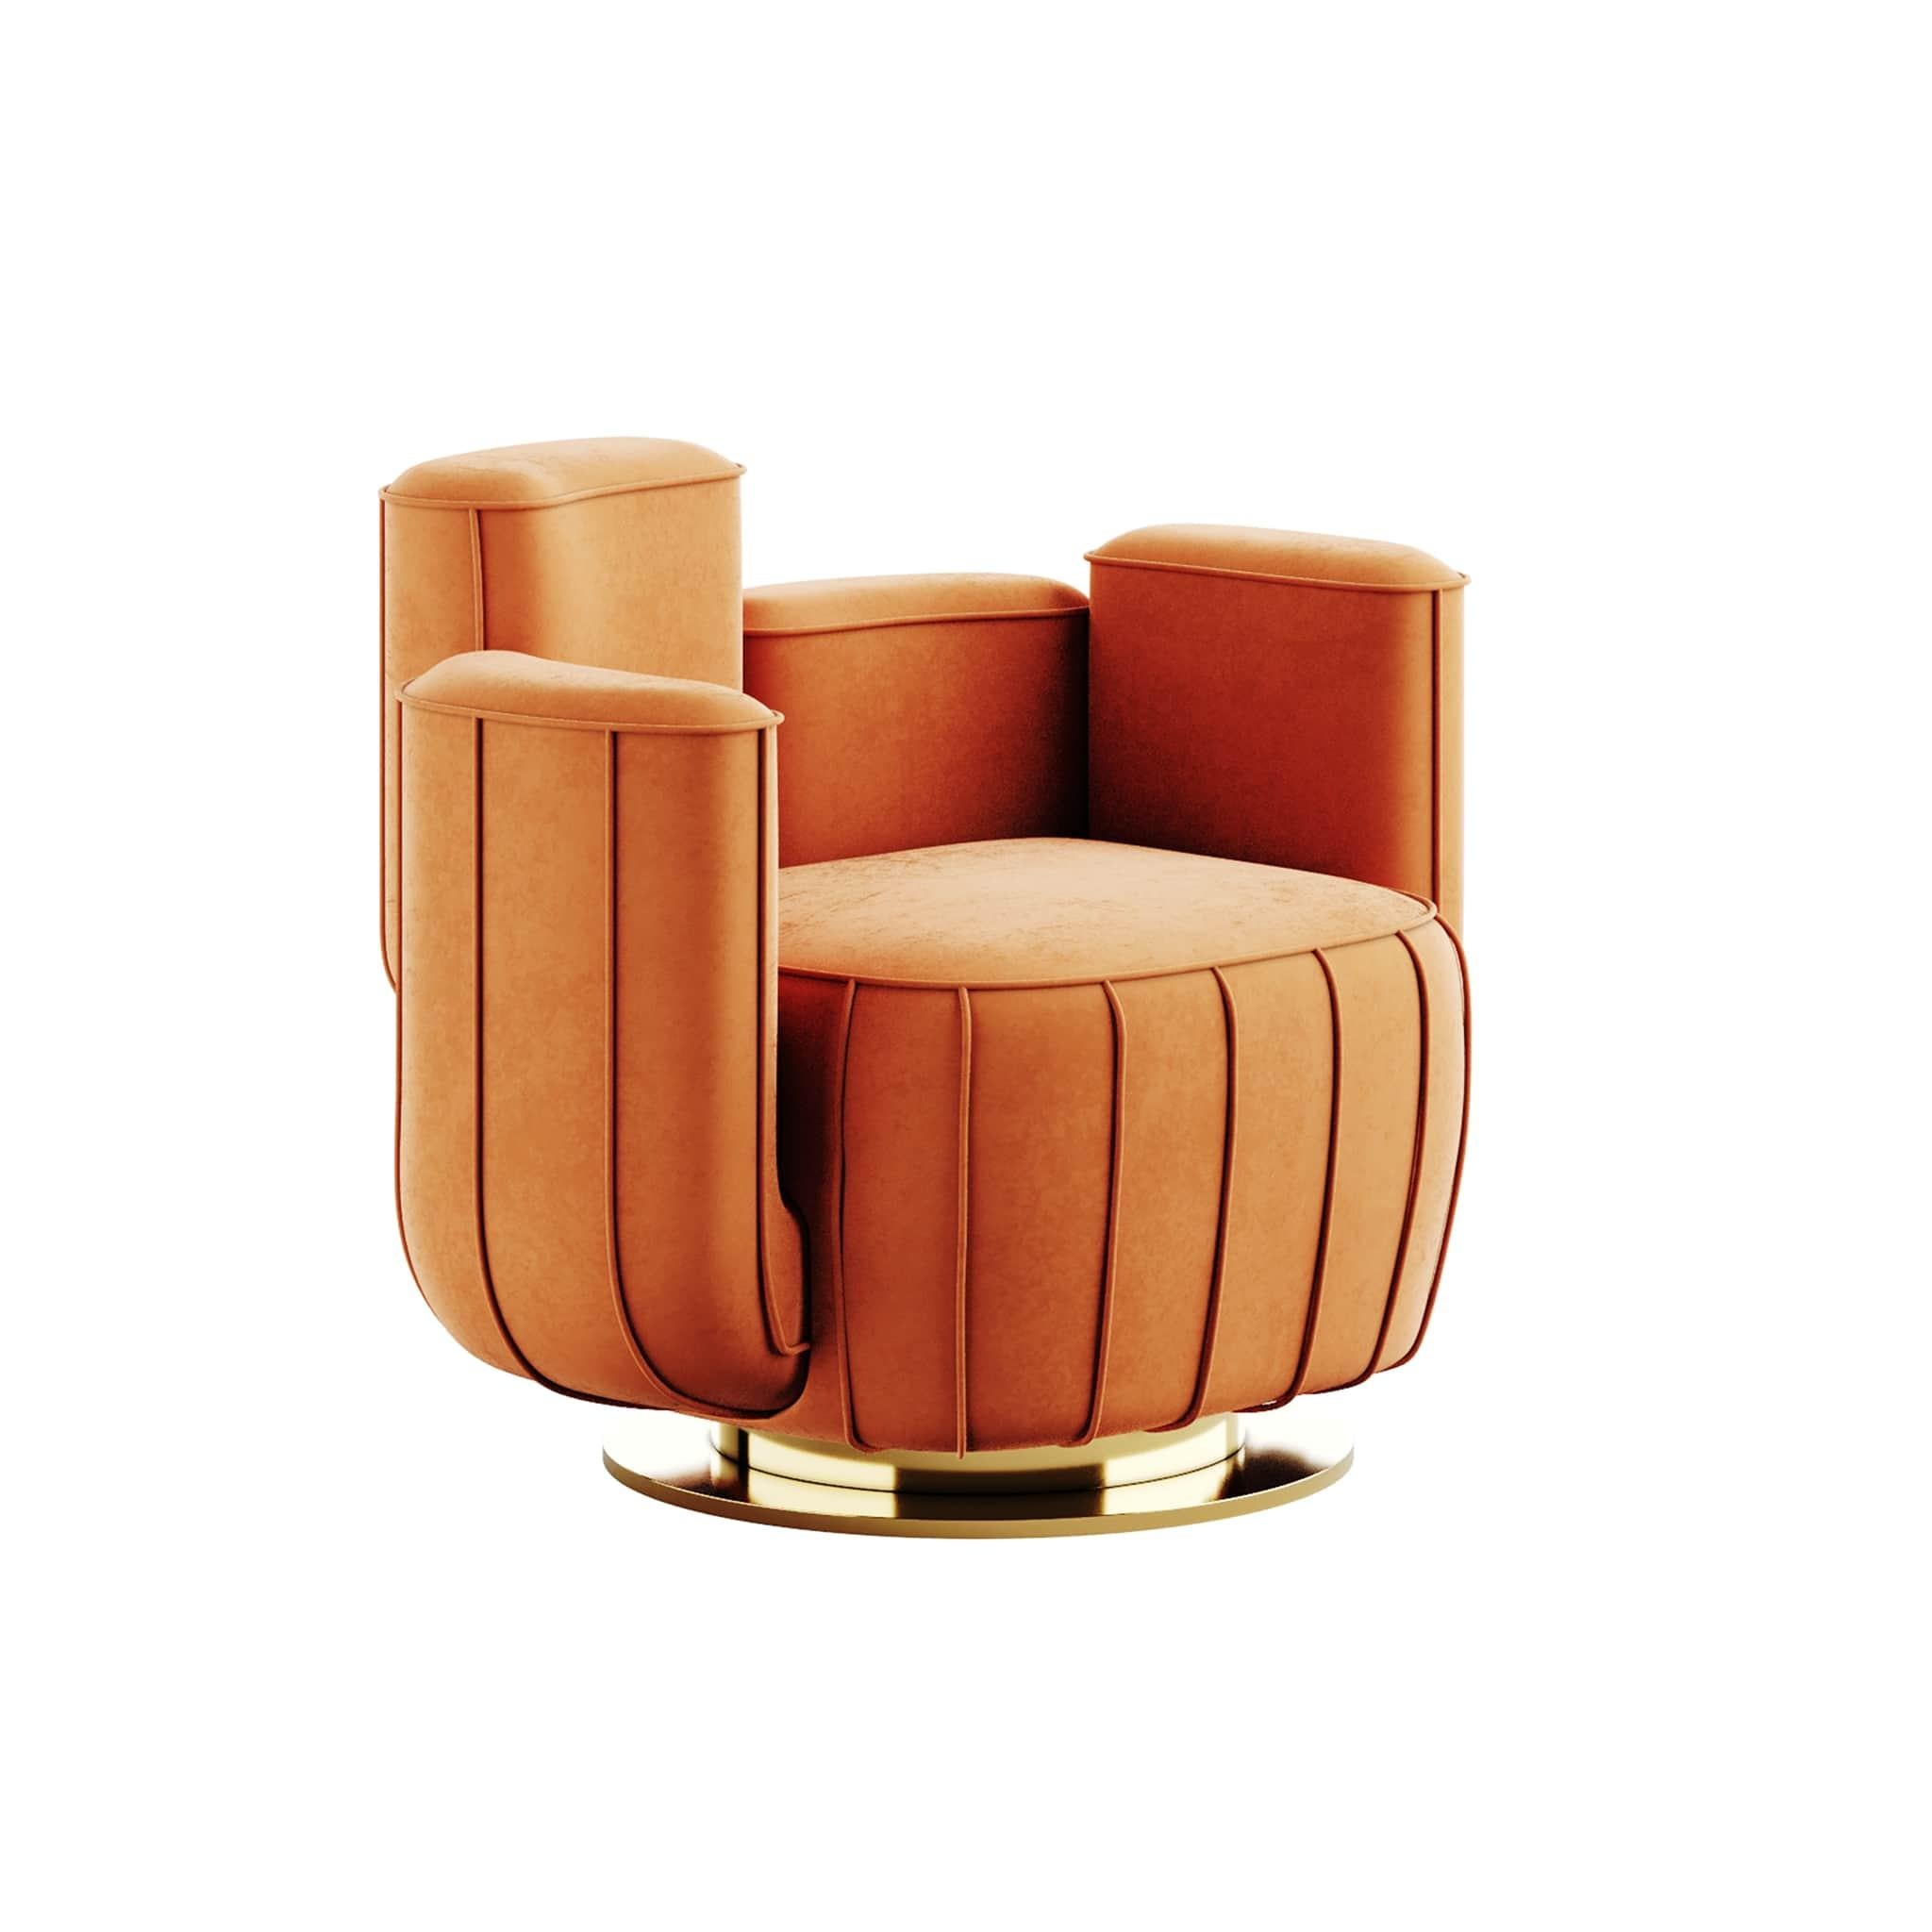 Modern Orange Velvet Armchair Cactus Shape with Gold Swivel Base Polished Brass

Ajui Armchair Terra is a luxury armchair that features an artsy interpretation of a cactus and a swivel base. It is upholstered in velvet with structure and base in